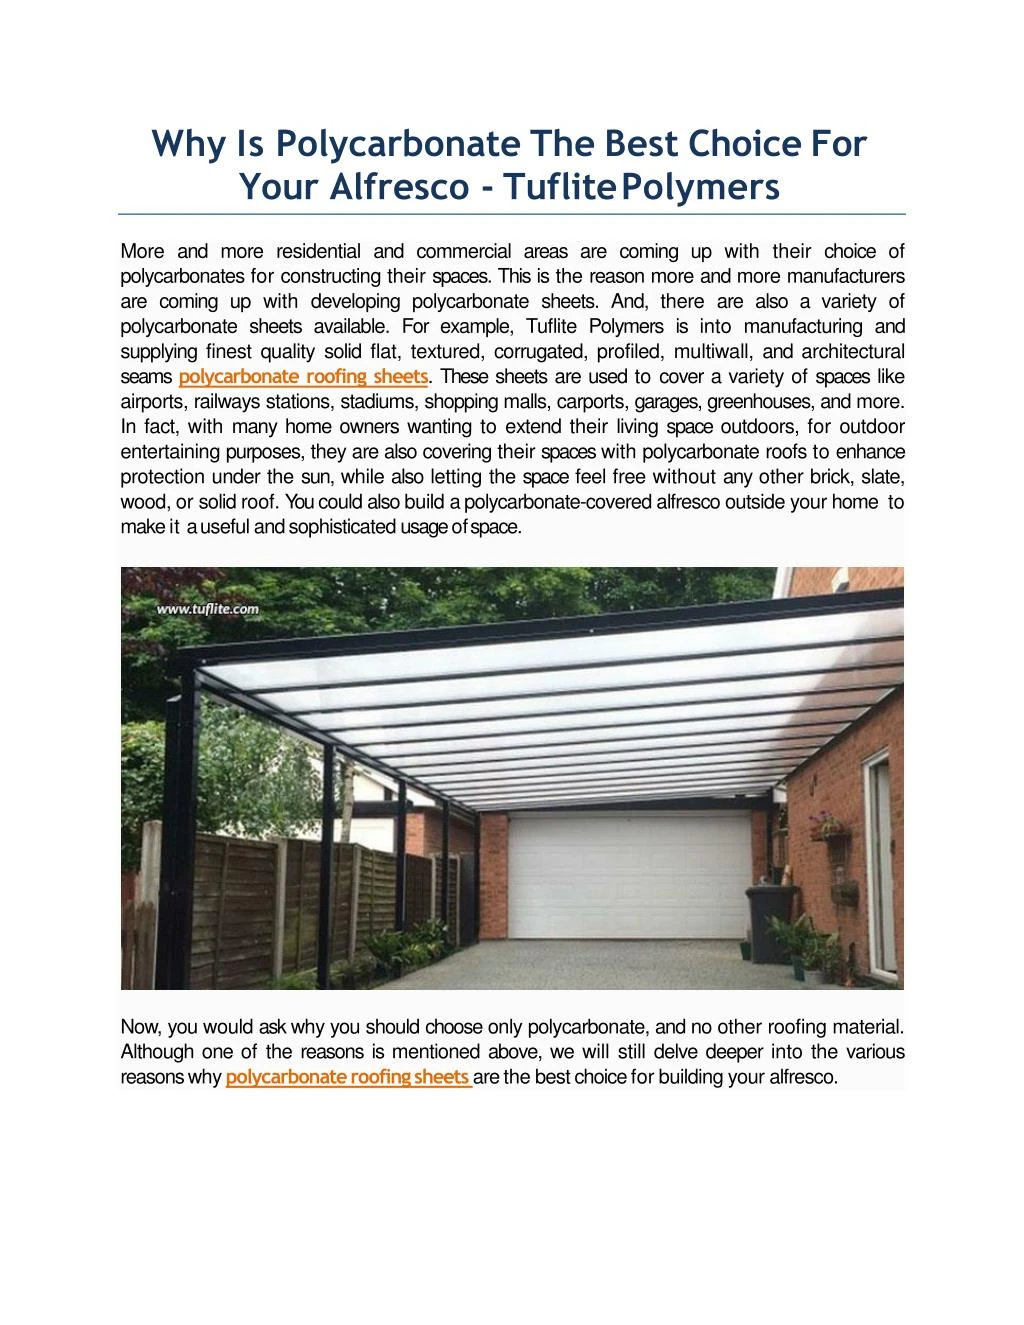 why is polycarbonate the best choice for your alfresco tuflite polymers